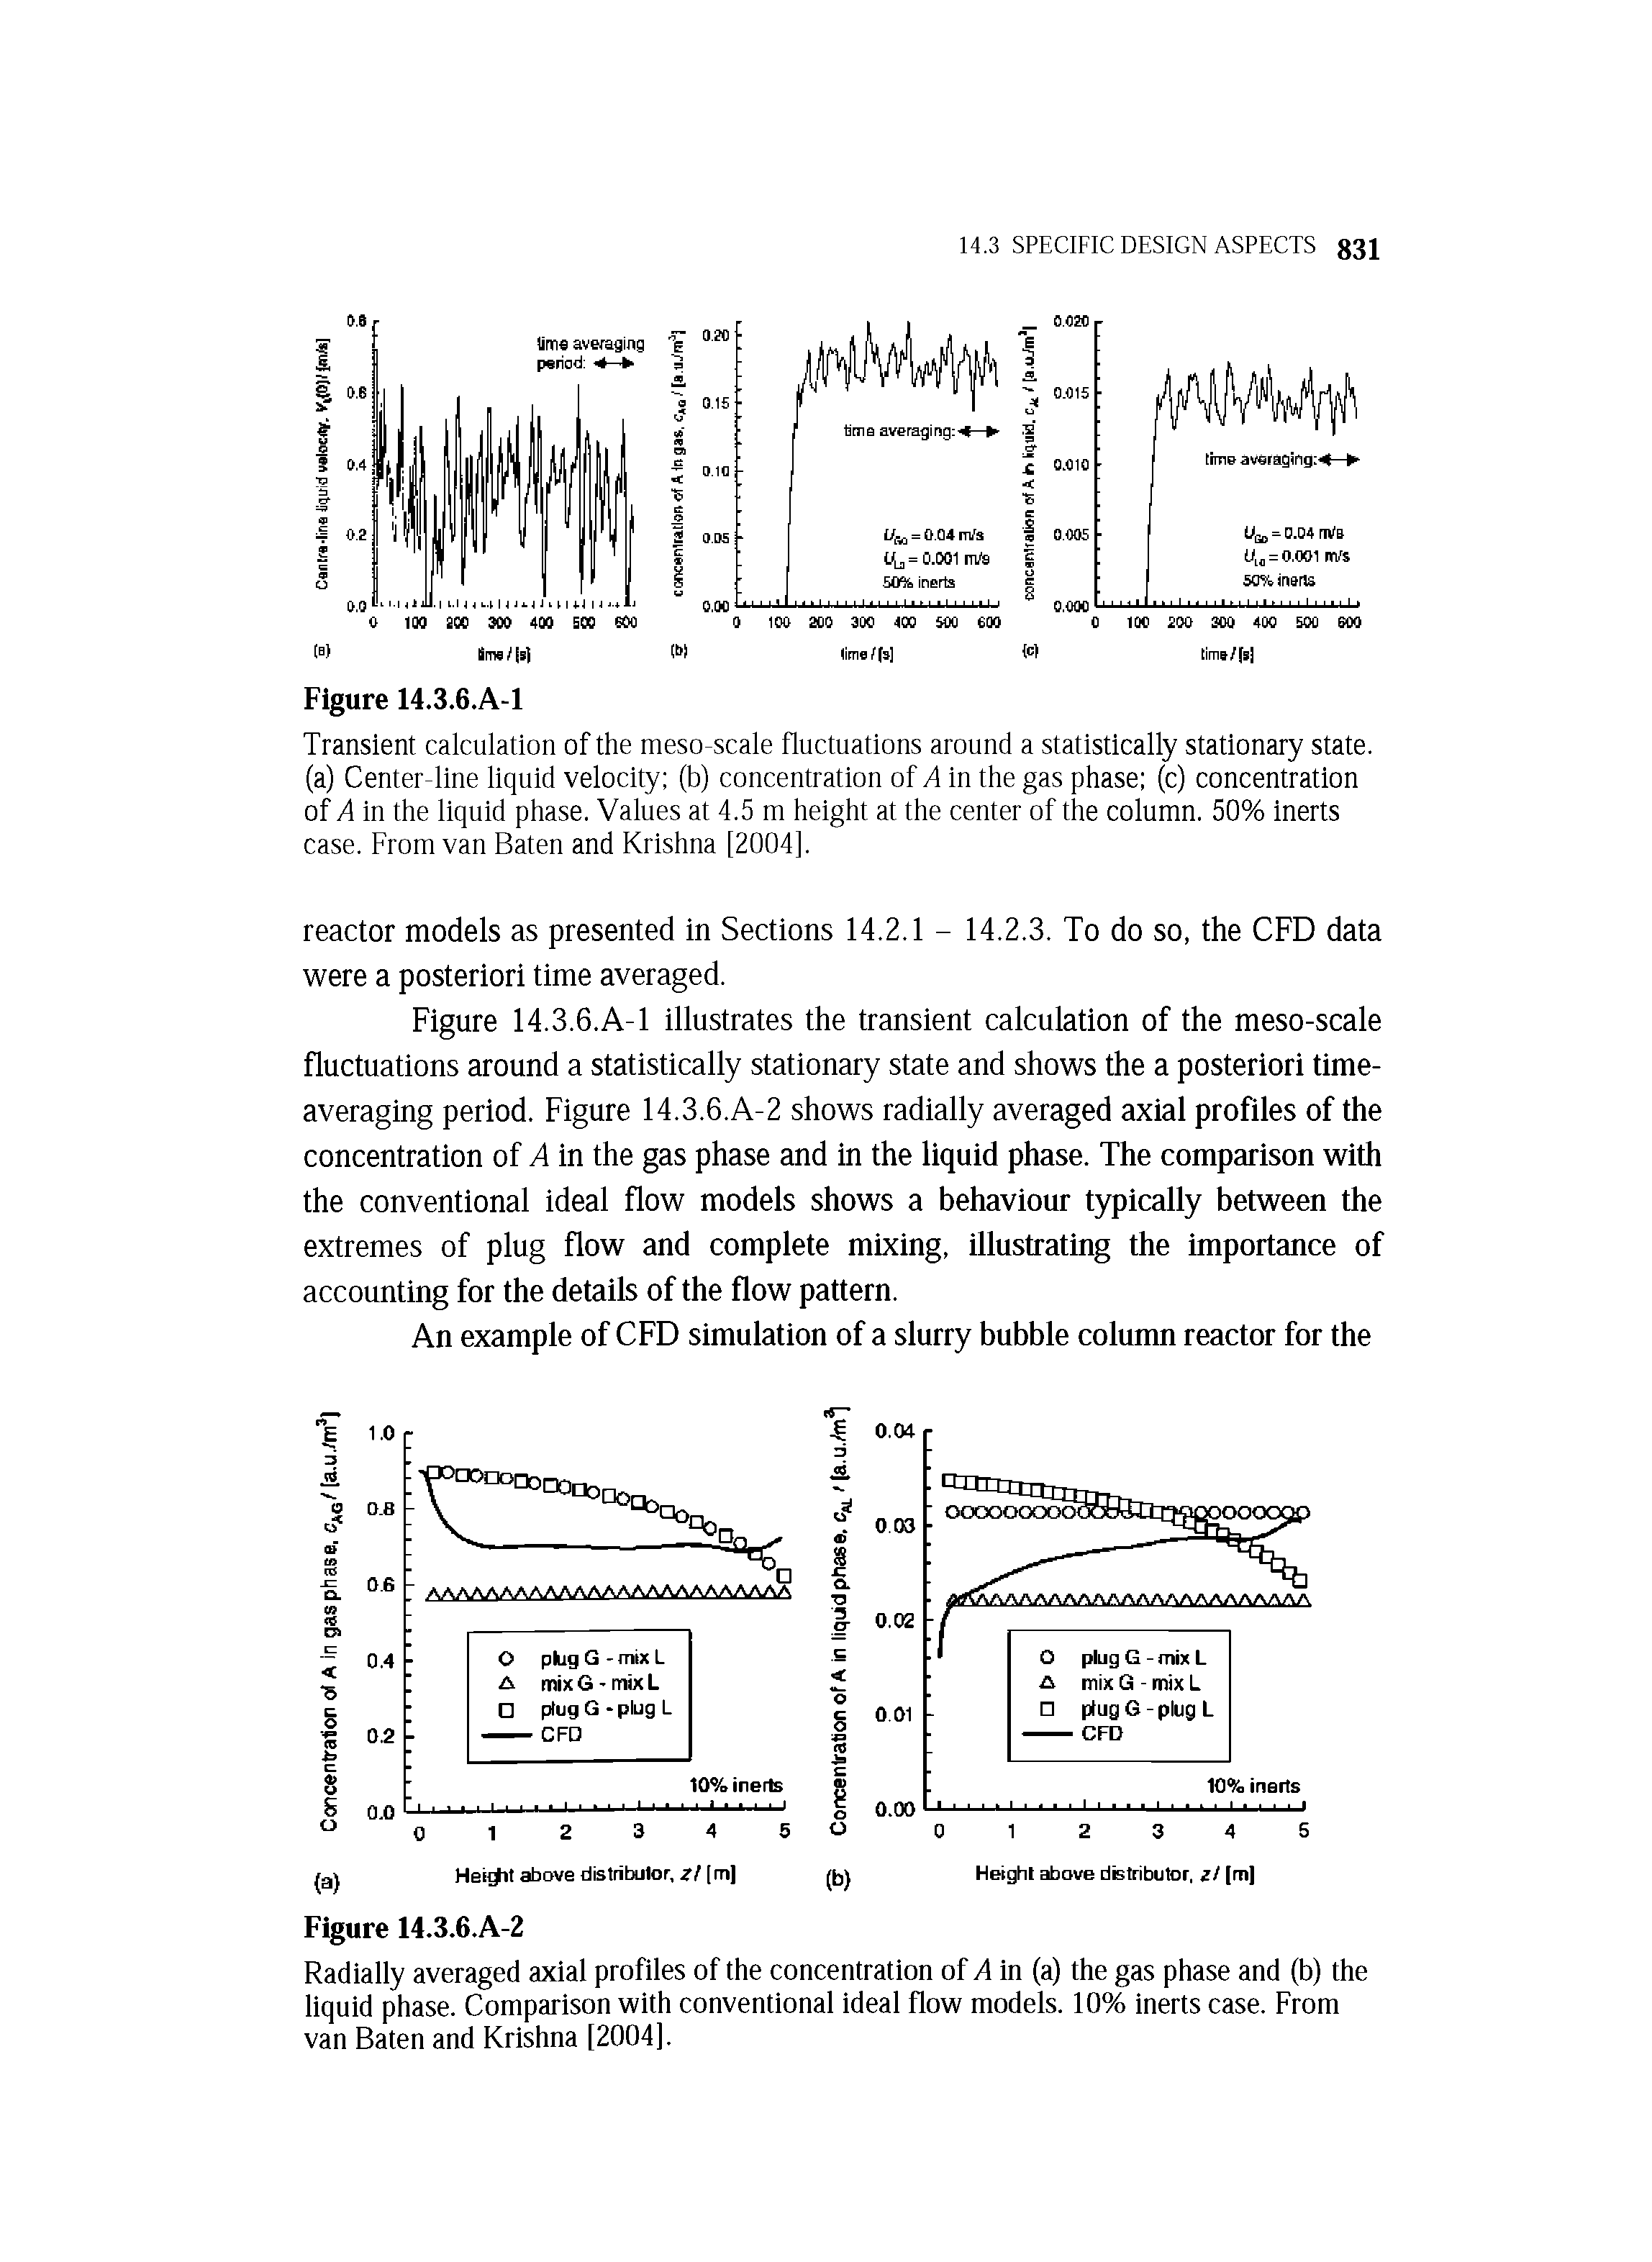 Figure 14.3.6.A-1 illustrates the transient calculation of the meso-scale fluctuations around a statistically stationary state and shows the a posteriori timeaveraging period. Figure 14.3.6.A-2 shows radially averaged axial profiles of the concentration of A in the gas phase and in the liquid phase. The comparison with the conventional ideal flow models shows a behaviour typically between the extremes of plug flow and complete mixing, illustrating the importance of accounting for the details of the flow pattern.